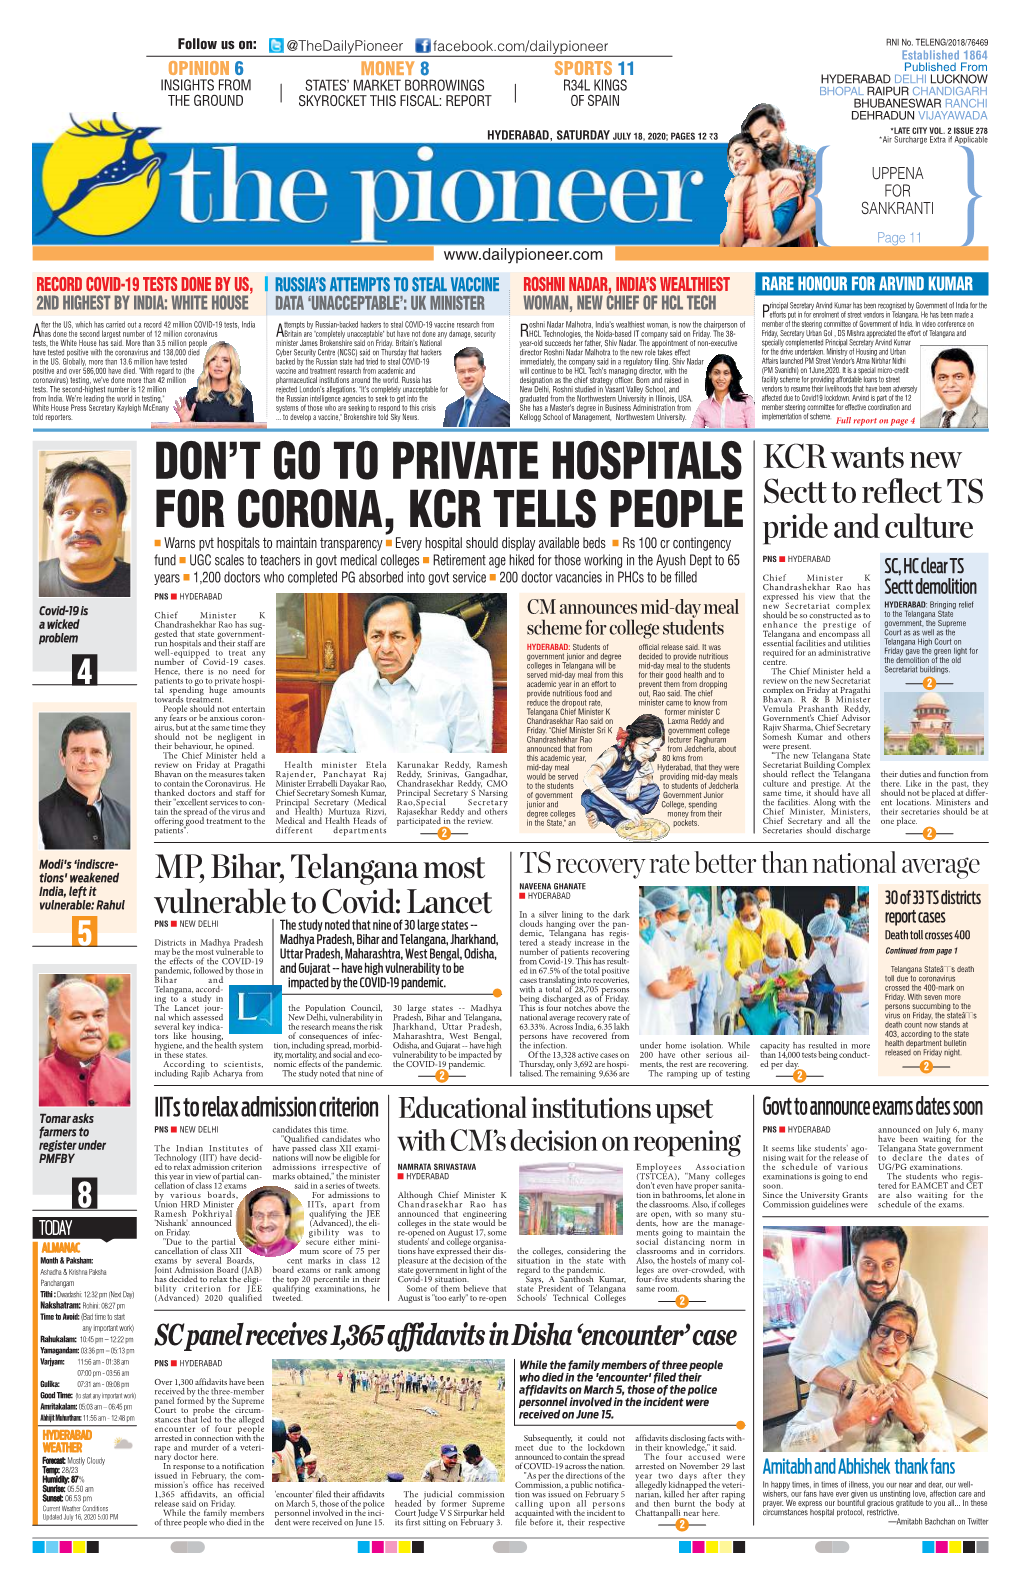 Don't Go to Private Hospitals for Corona, Kcr Tells People